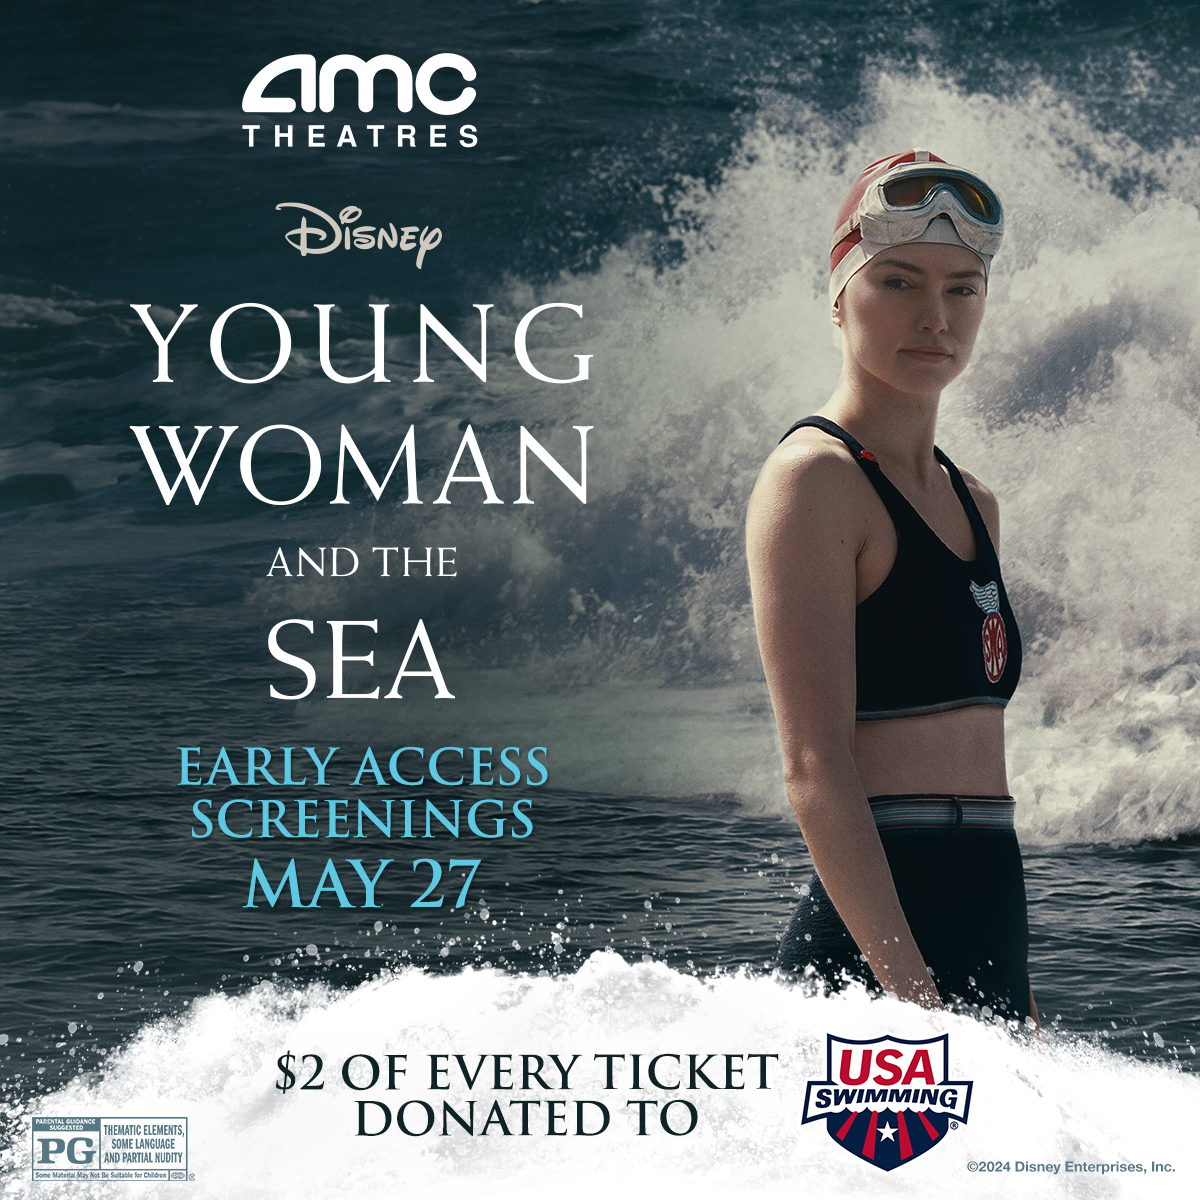 Enjoy an early screening of #YoungWomanAndTheSea at select theaters on May 27, where a percentage of each ticket sold will go to support the USA Swimming non-profit. Get your tickets here👇 fandan.co/YoungWomanAndT…